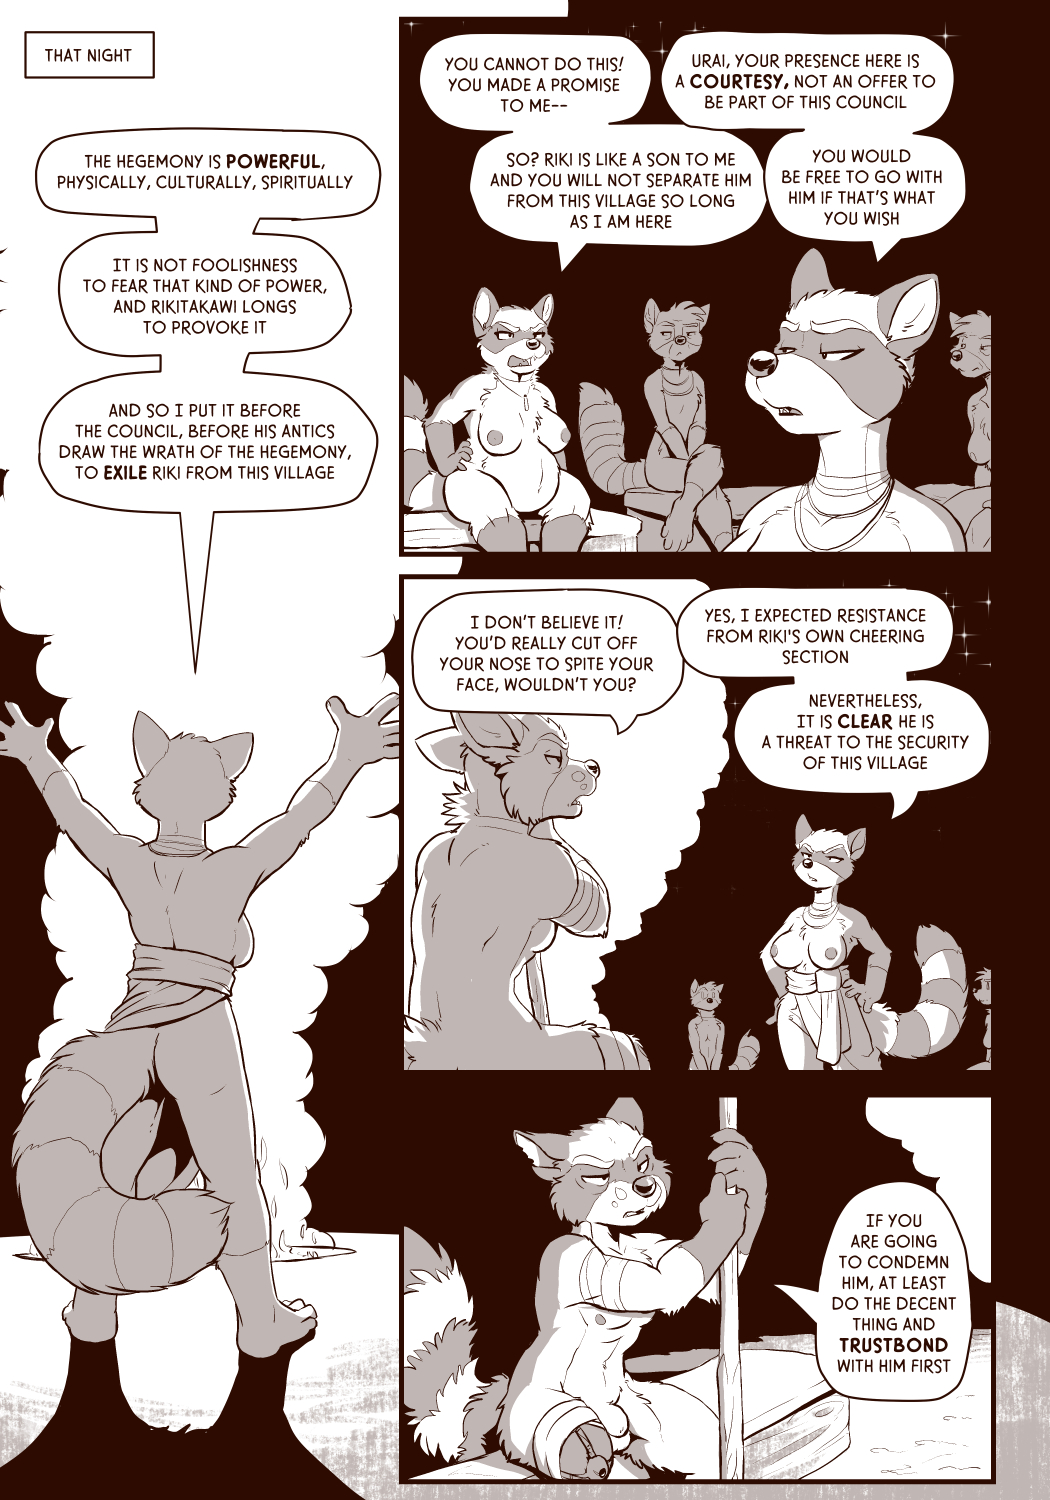 TotP Page 6 NSFW